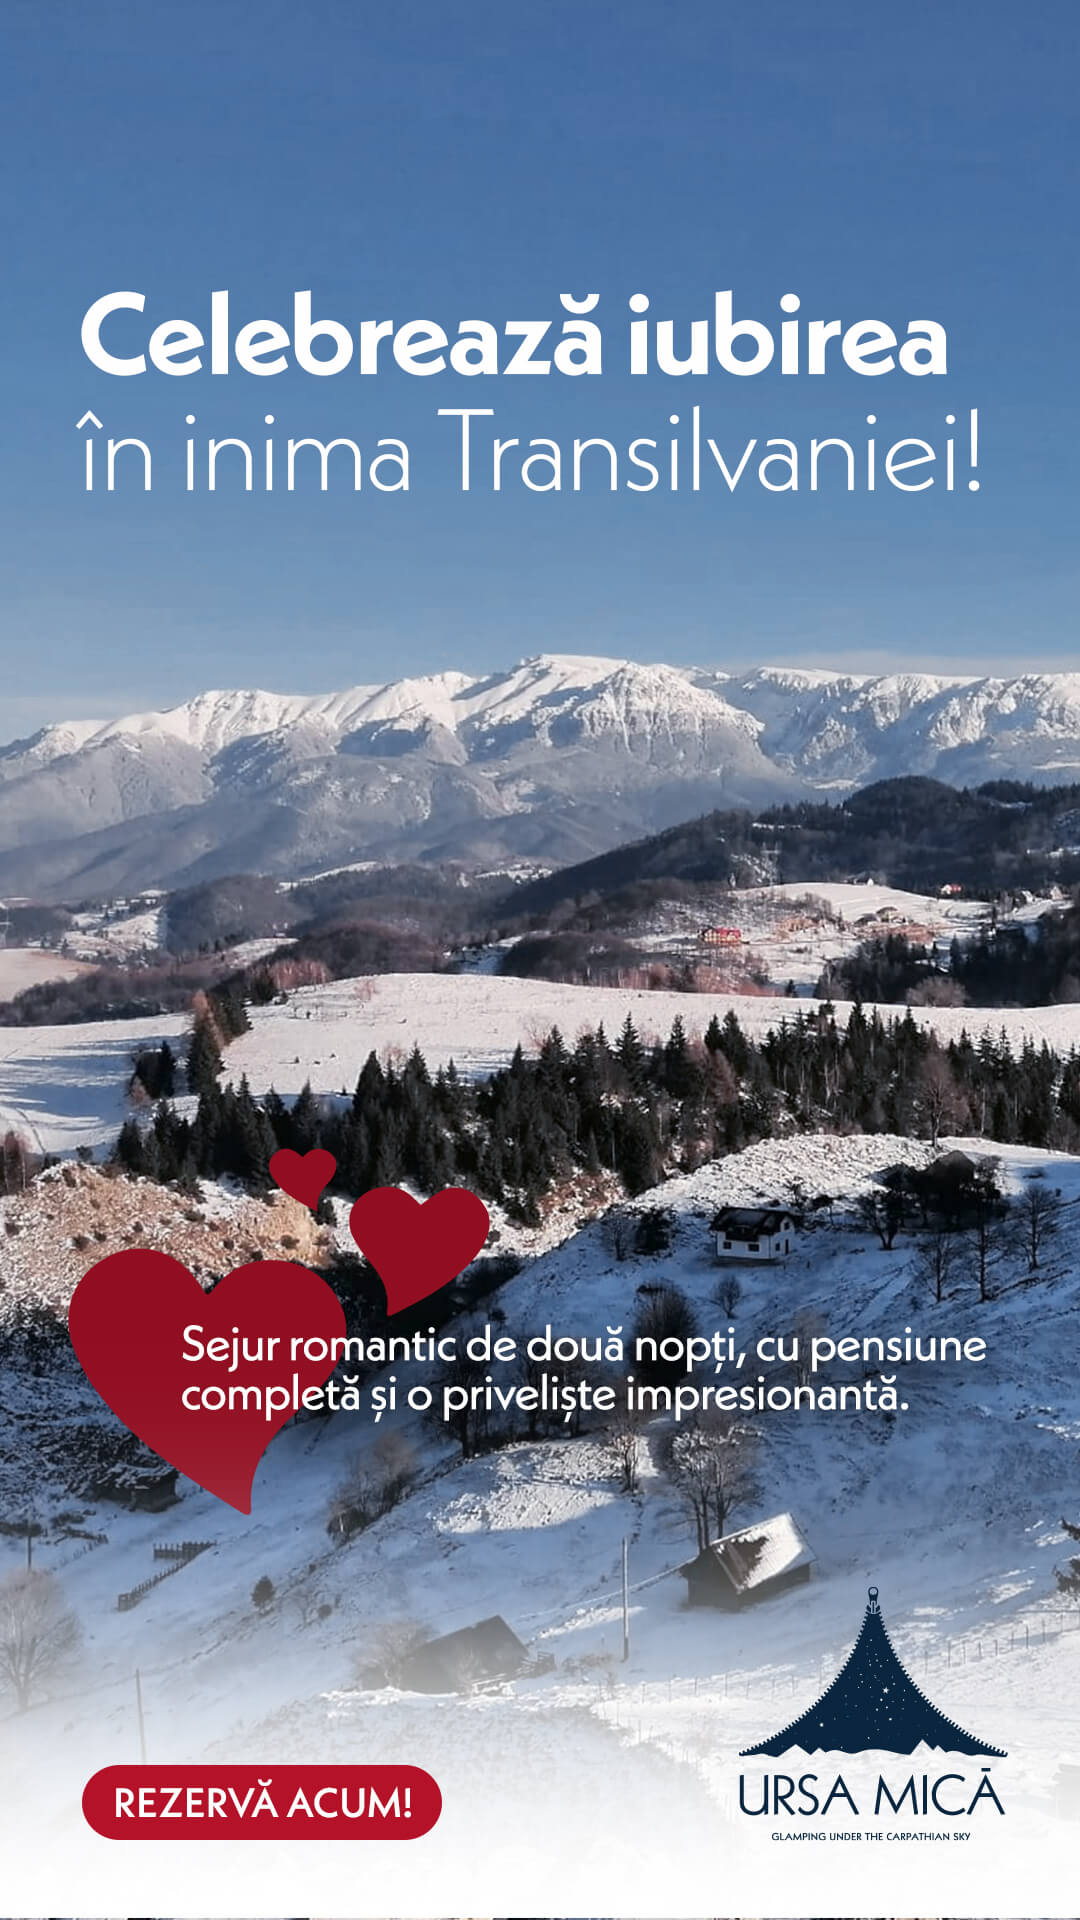 Romantic 2 nights Exclusive Package for two in Transylvania